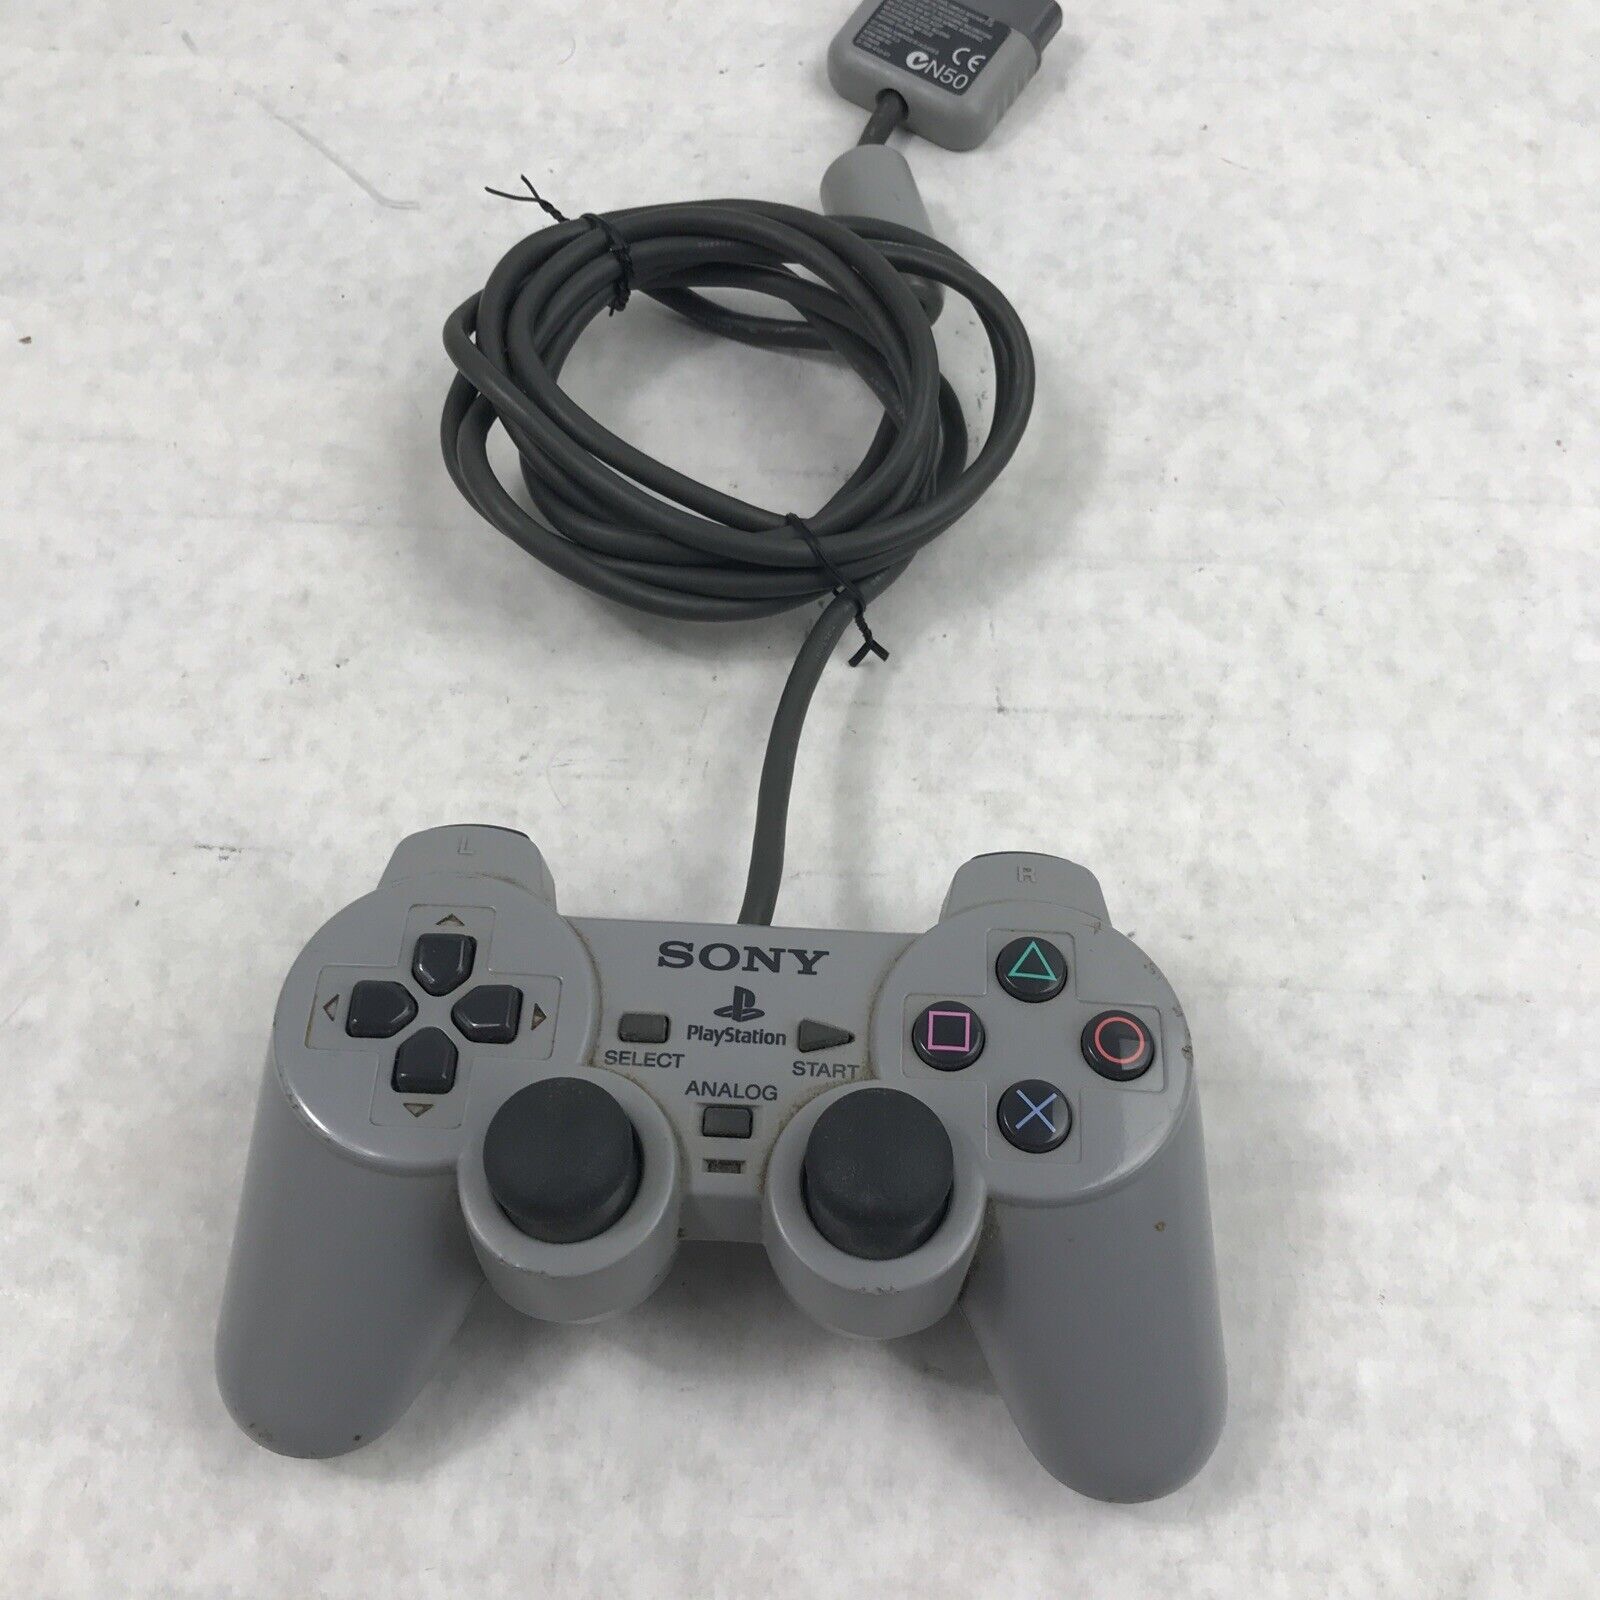 Official OEM Sony PlayStation PS1 Dual Shock Analog Controller SCPH-1200